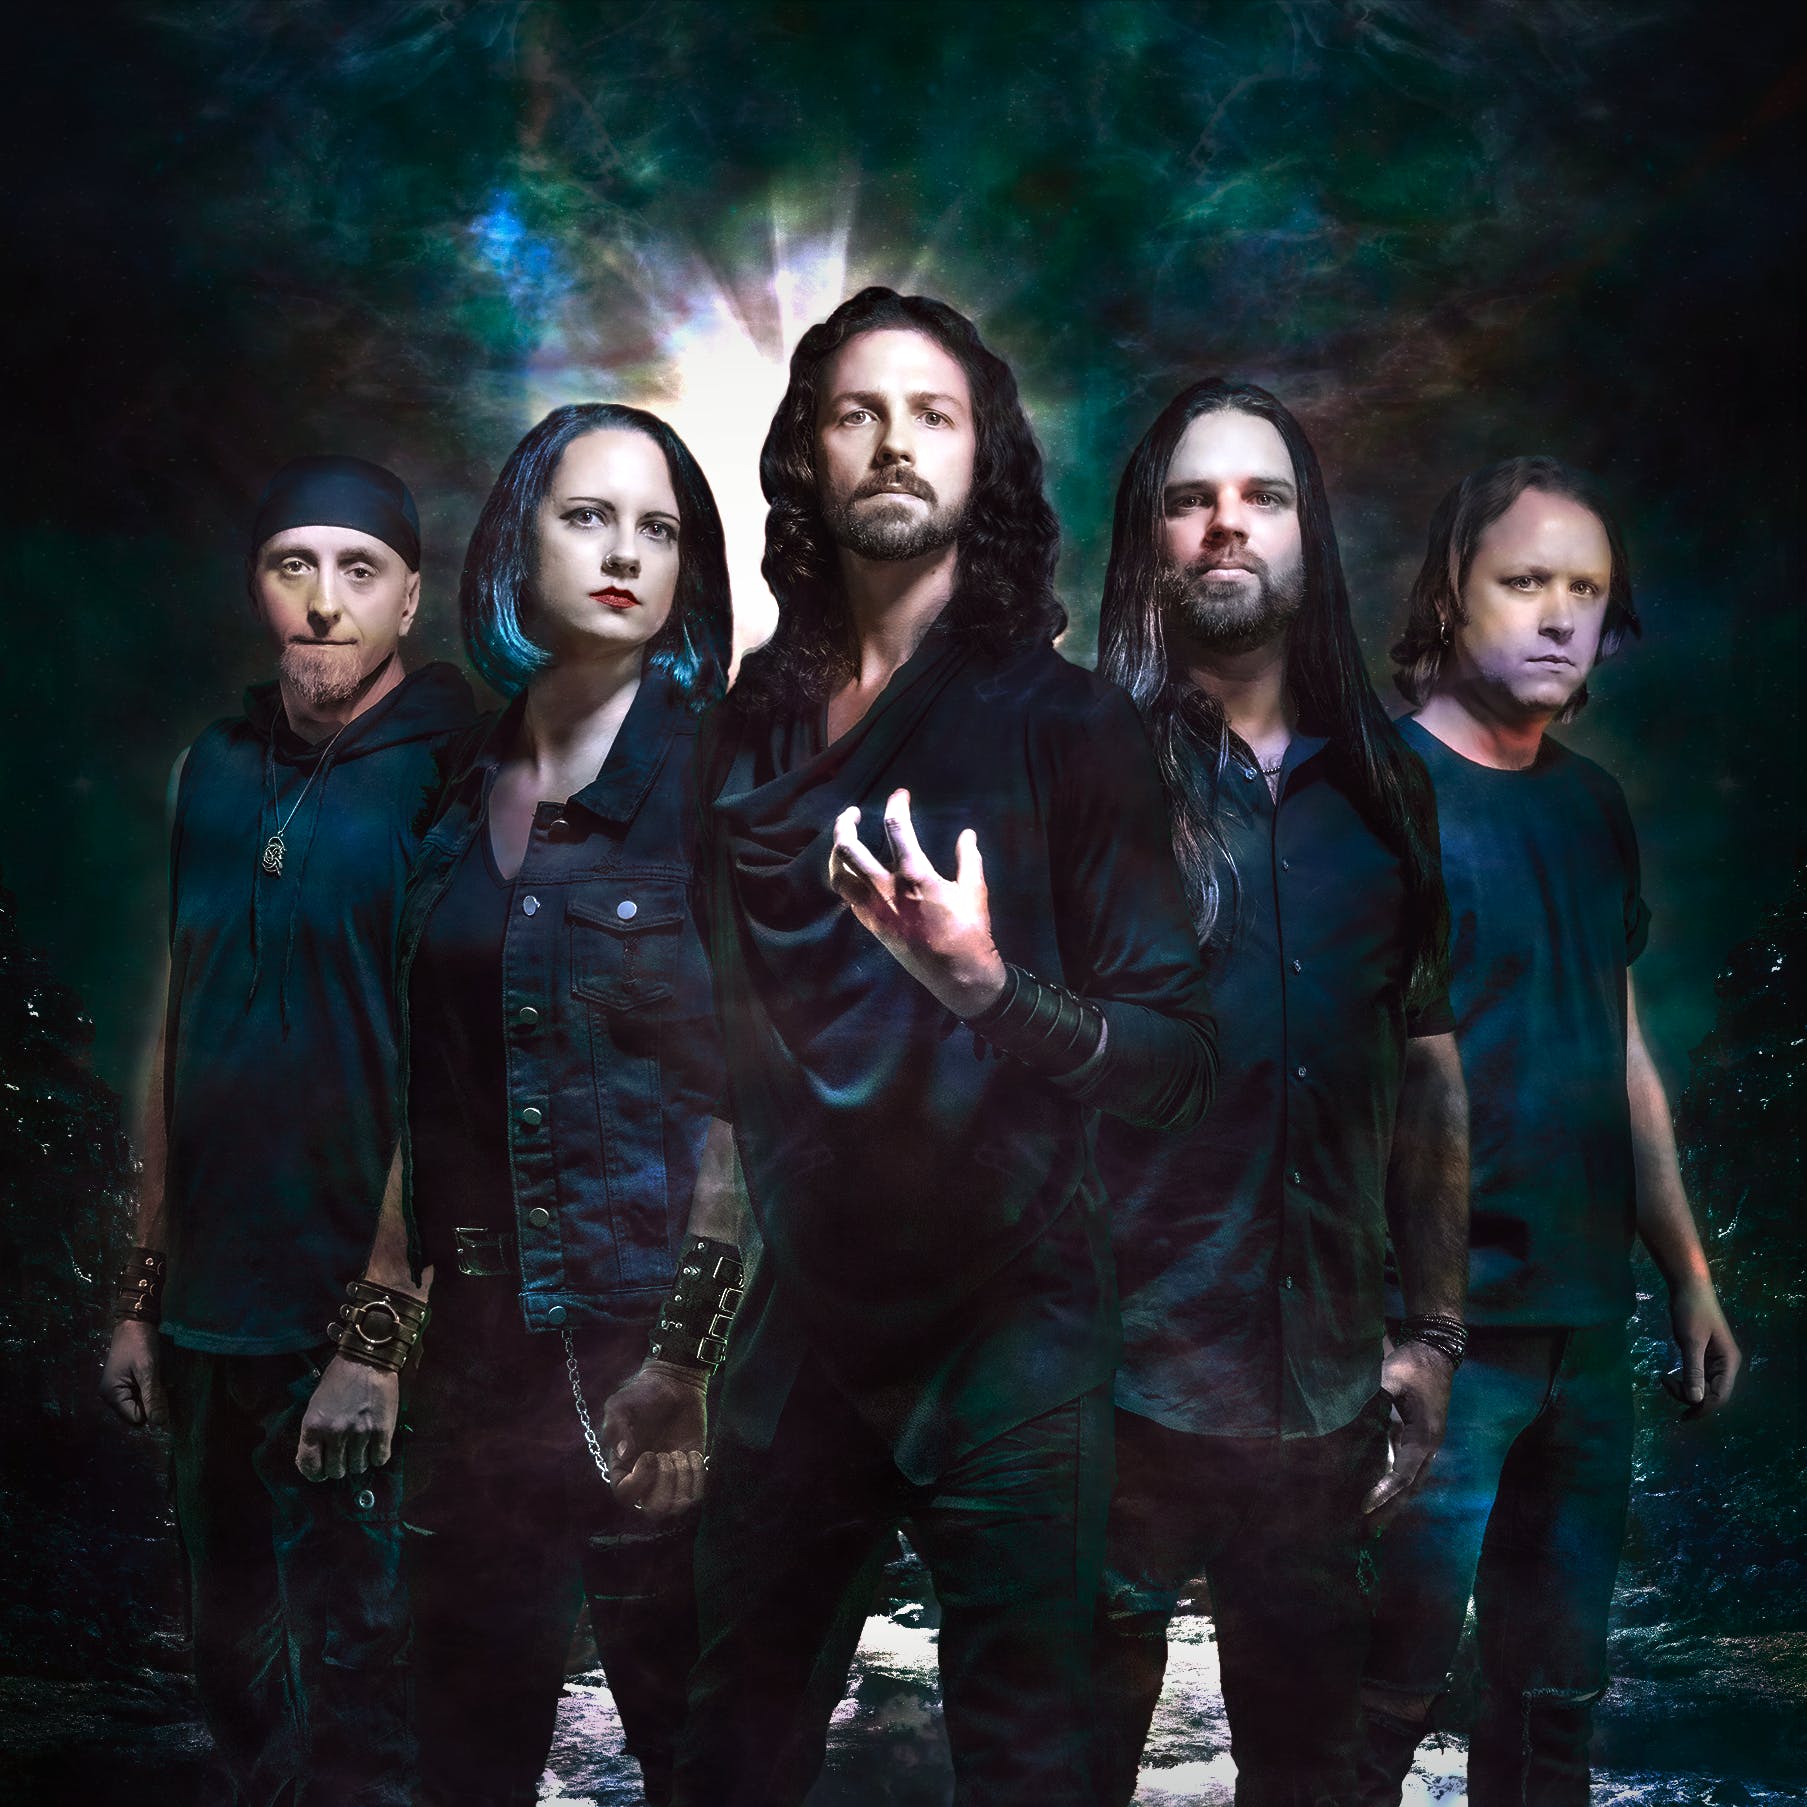 The Chosen Ones - a Studio release by STRATOVARIUS artist / band